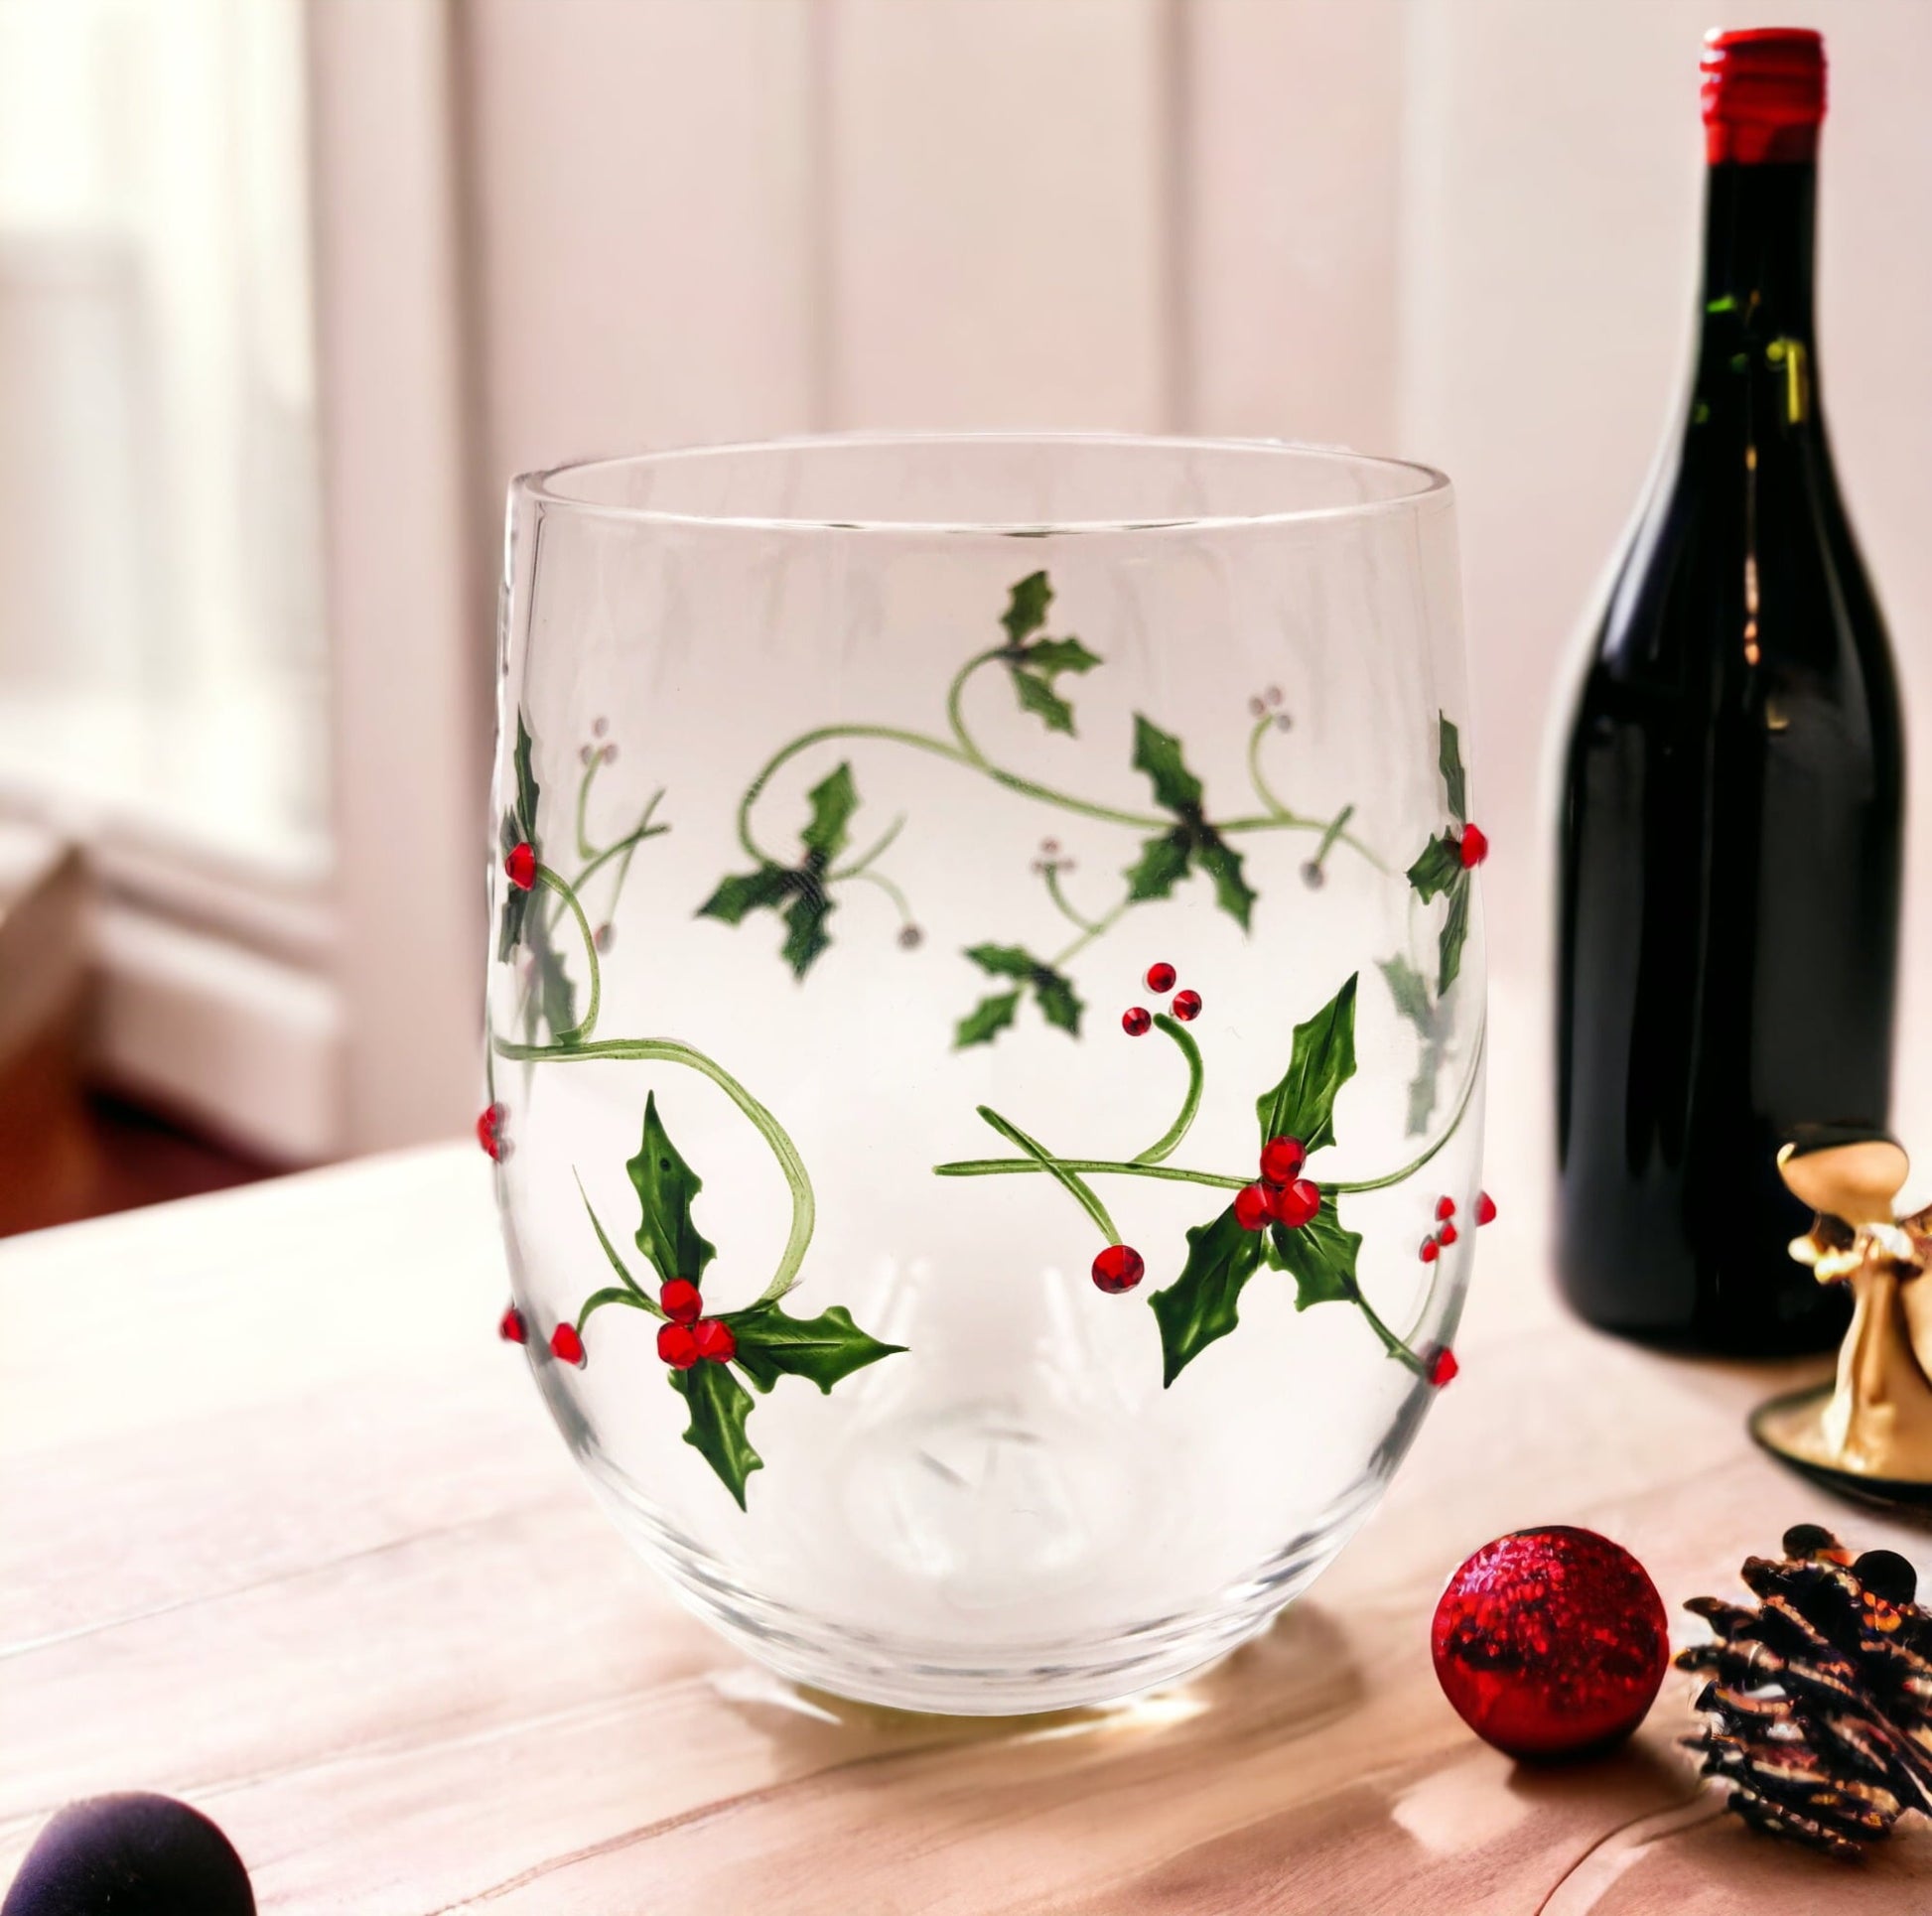 Holiday Cheer Set of 4 Stemless Wine Glasses with Christmas Icons Includes 4  Designs